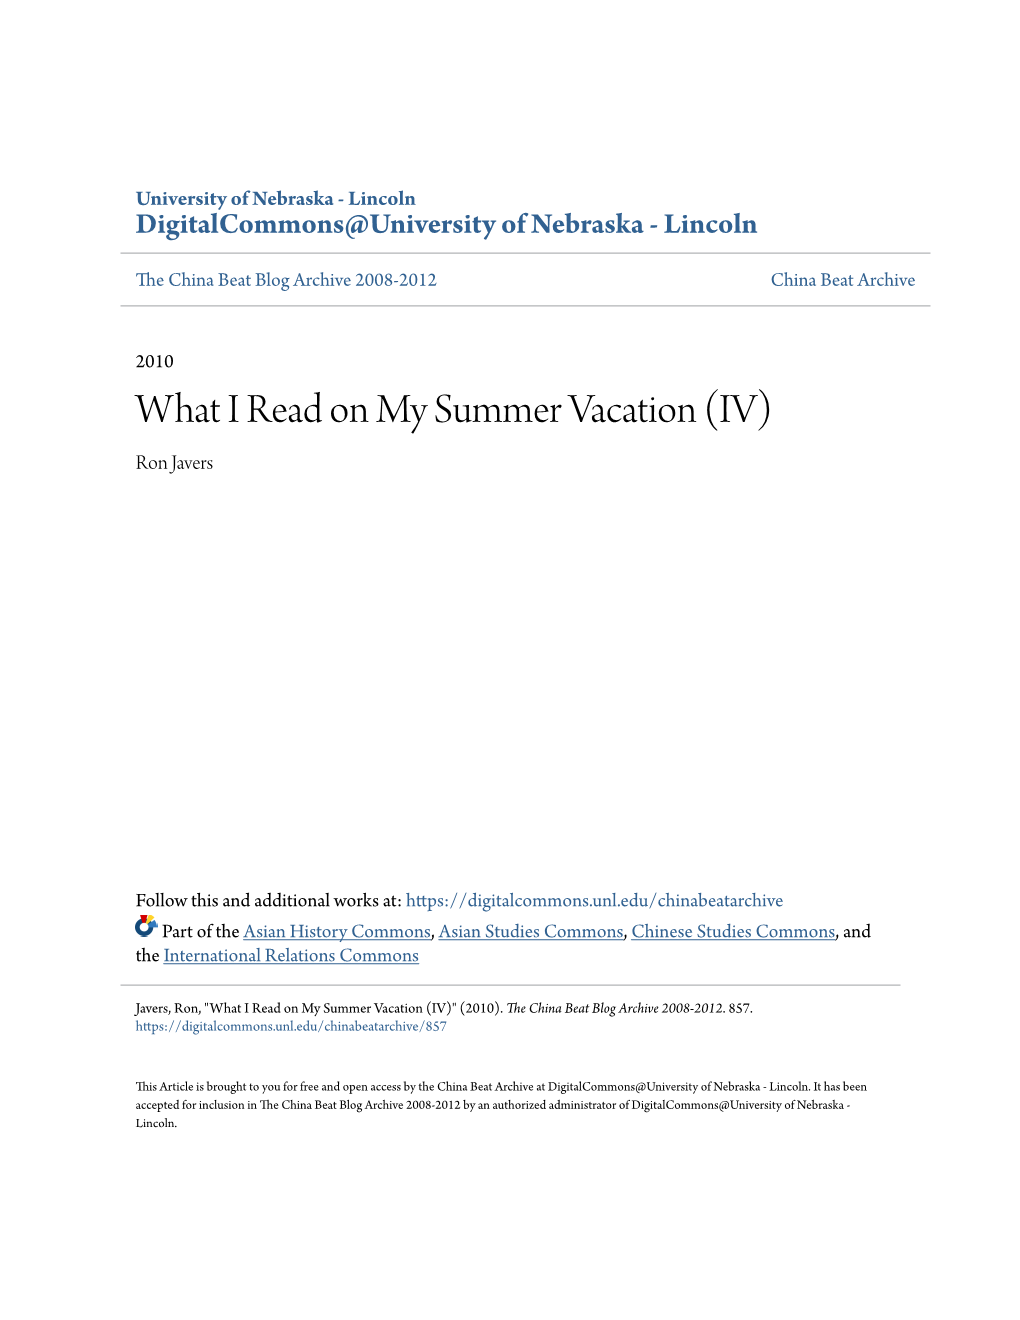 What I Read on My Summer Vacation (IV) Ron Javers